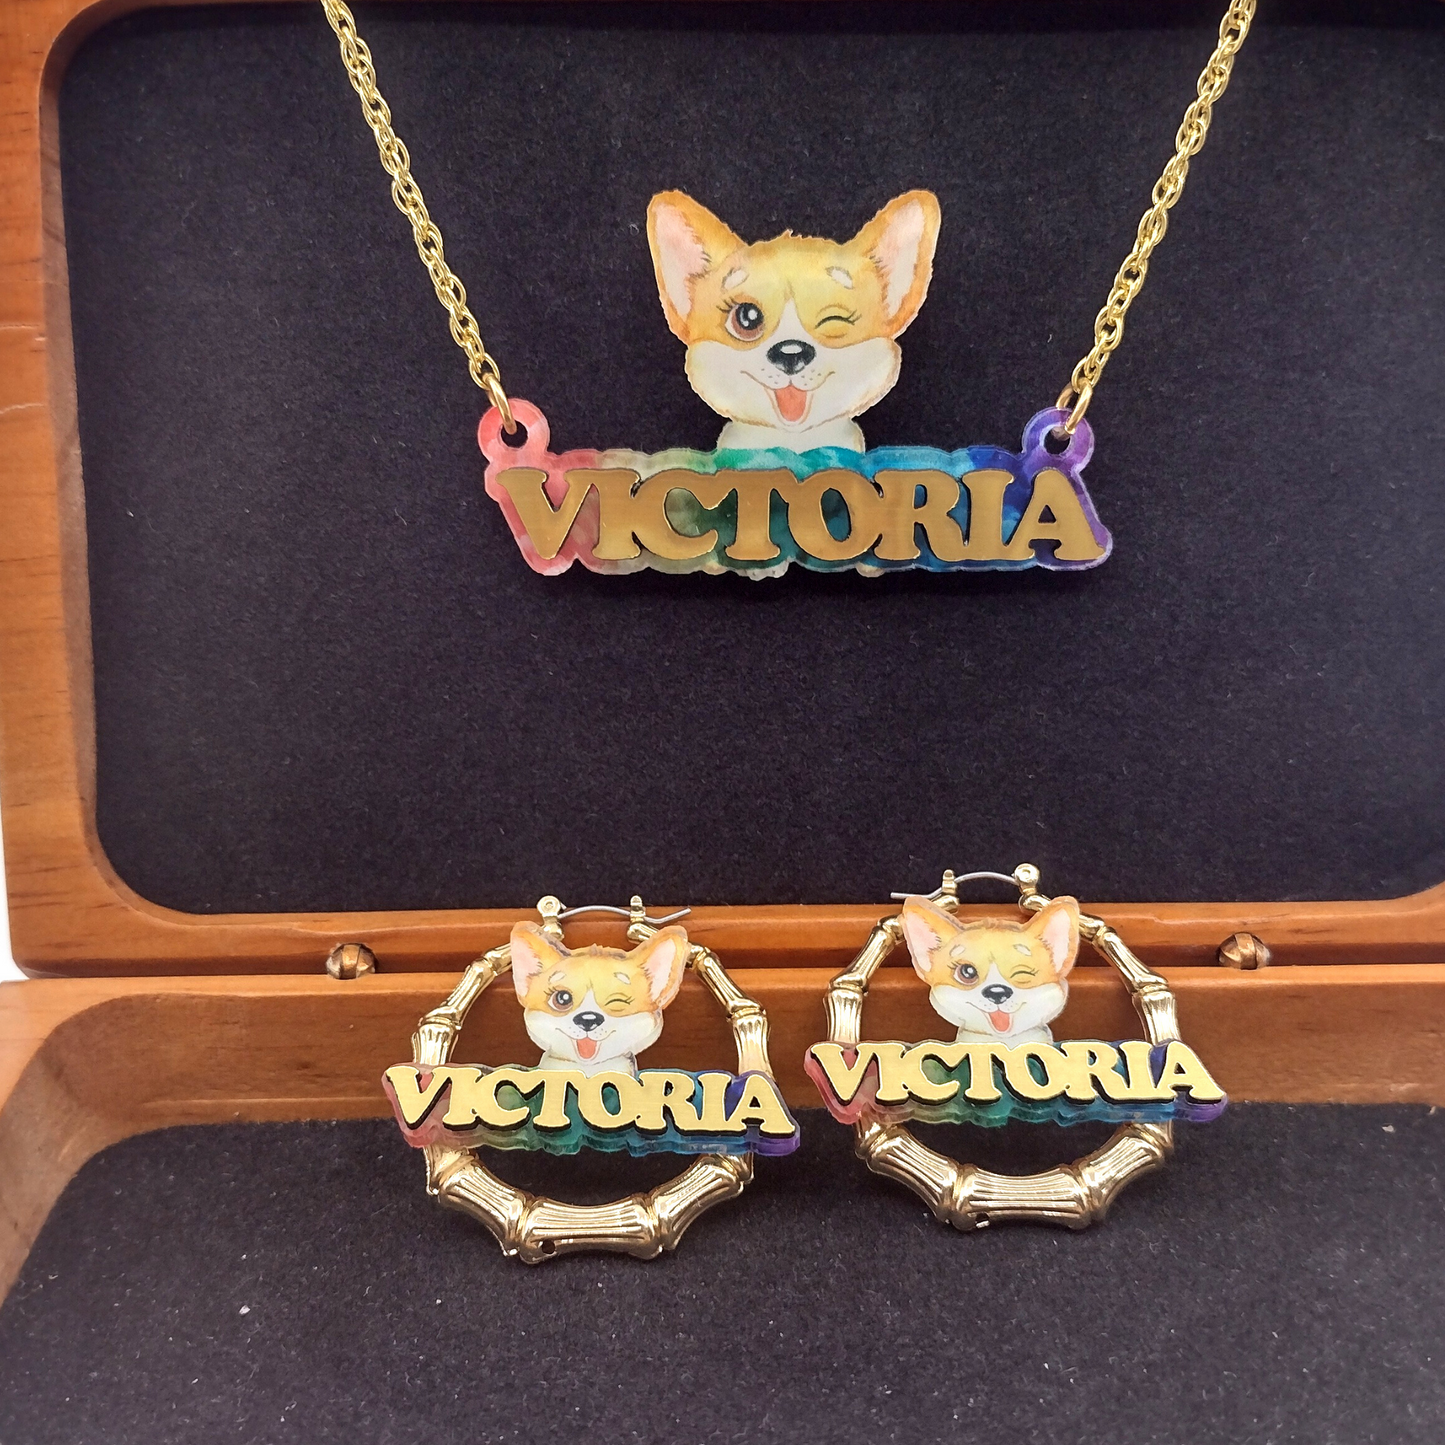 Custom Name Earrings and Necklace Jewelry Set, UV Printed, Personalized Puppy Design